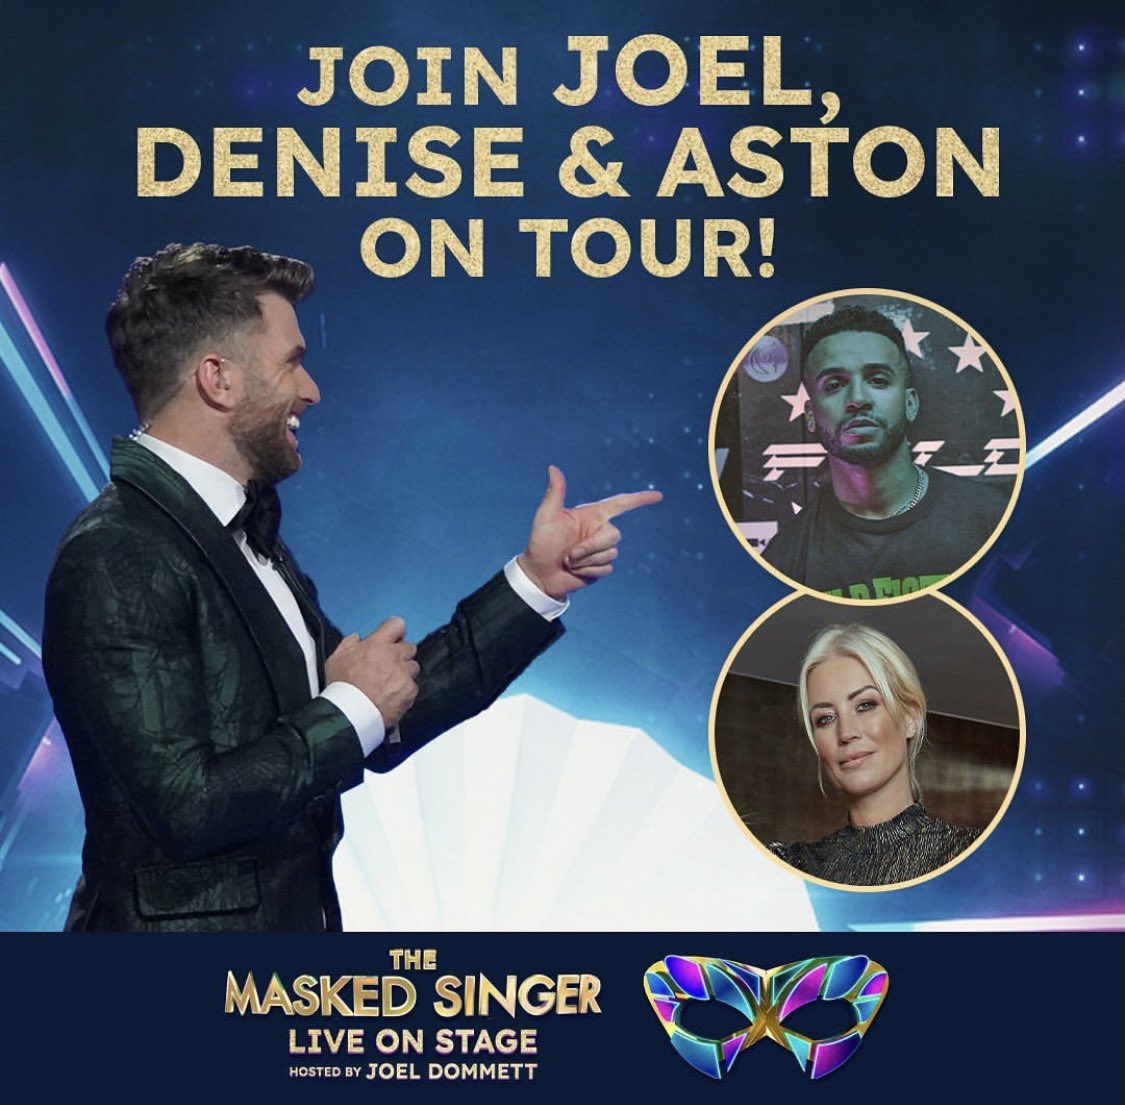 #MaskedSingerUKLive announces @denise_vanouten 🦊 & @AstonMerrygold 🐦 as their first two judges for the full UK tour. 

@joeldommett will continue his hosting duties too! 🎶 🎤